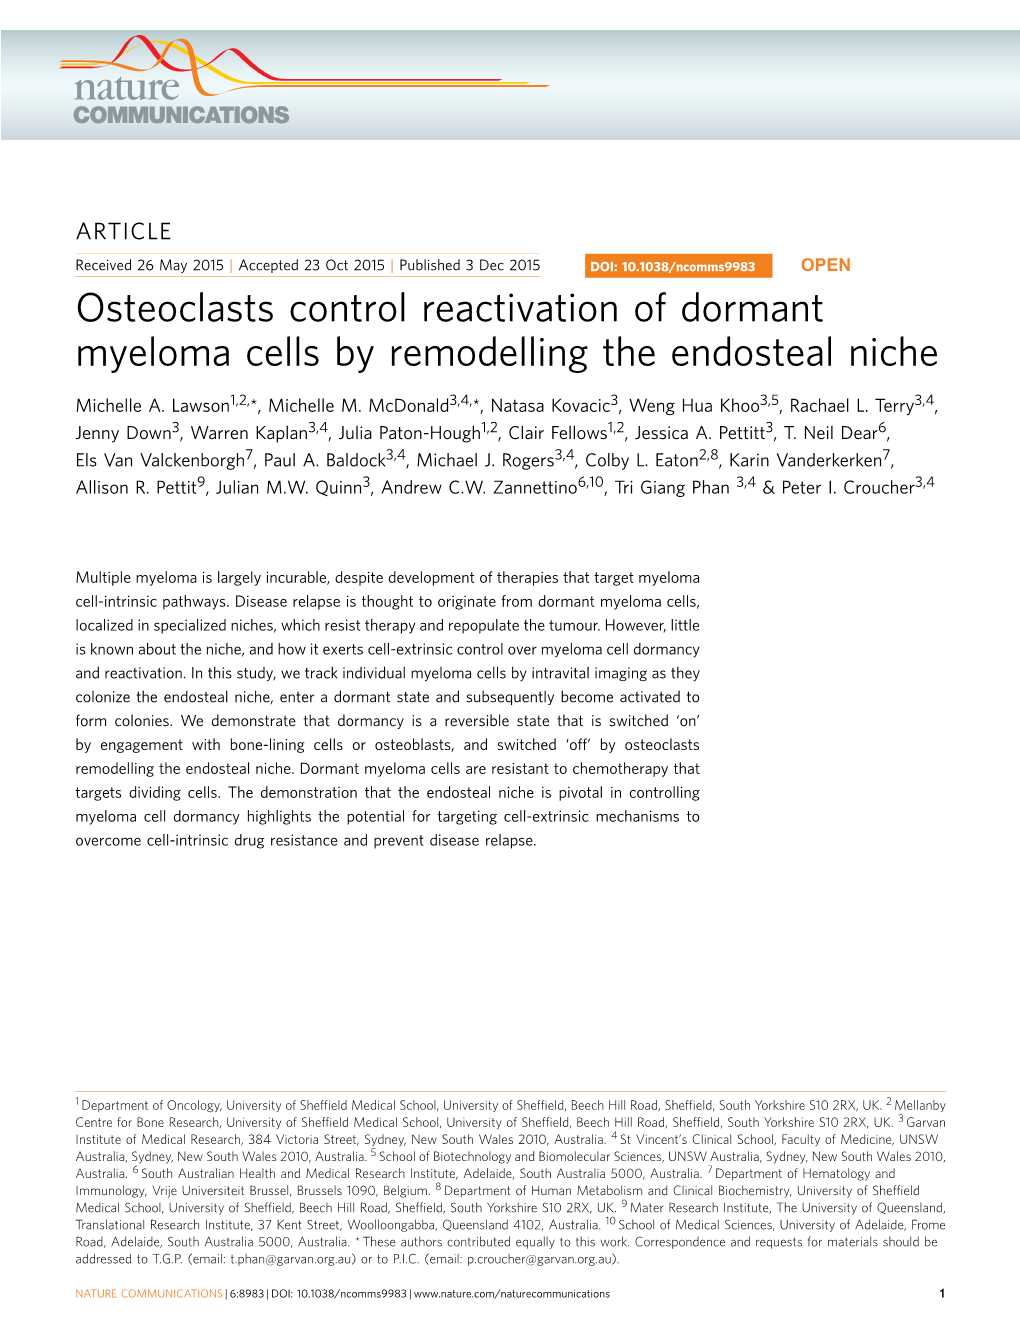 Osteoclasts Control Reactivation of Dormant Myeloma Cells by Remodelling the Endosteal Niche